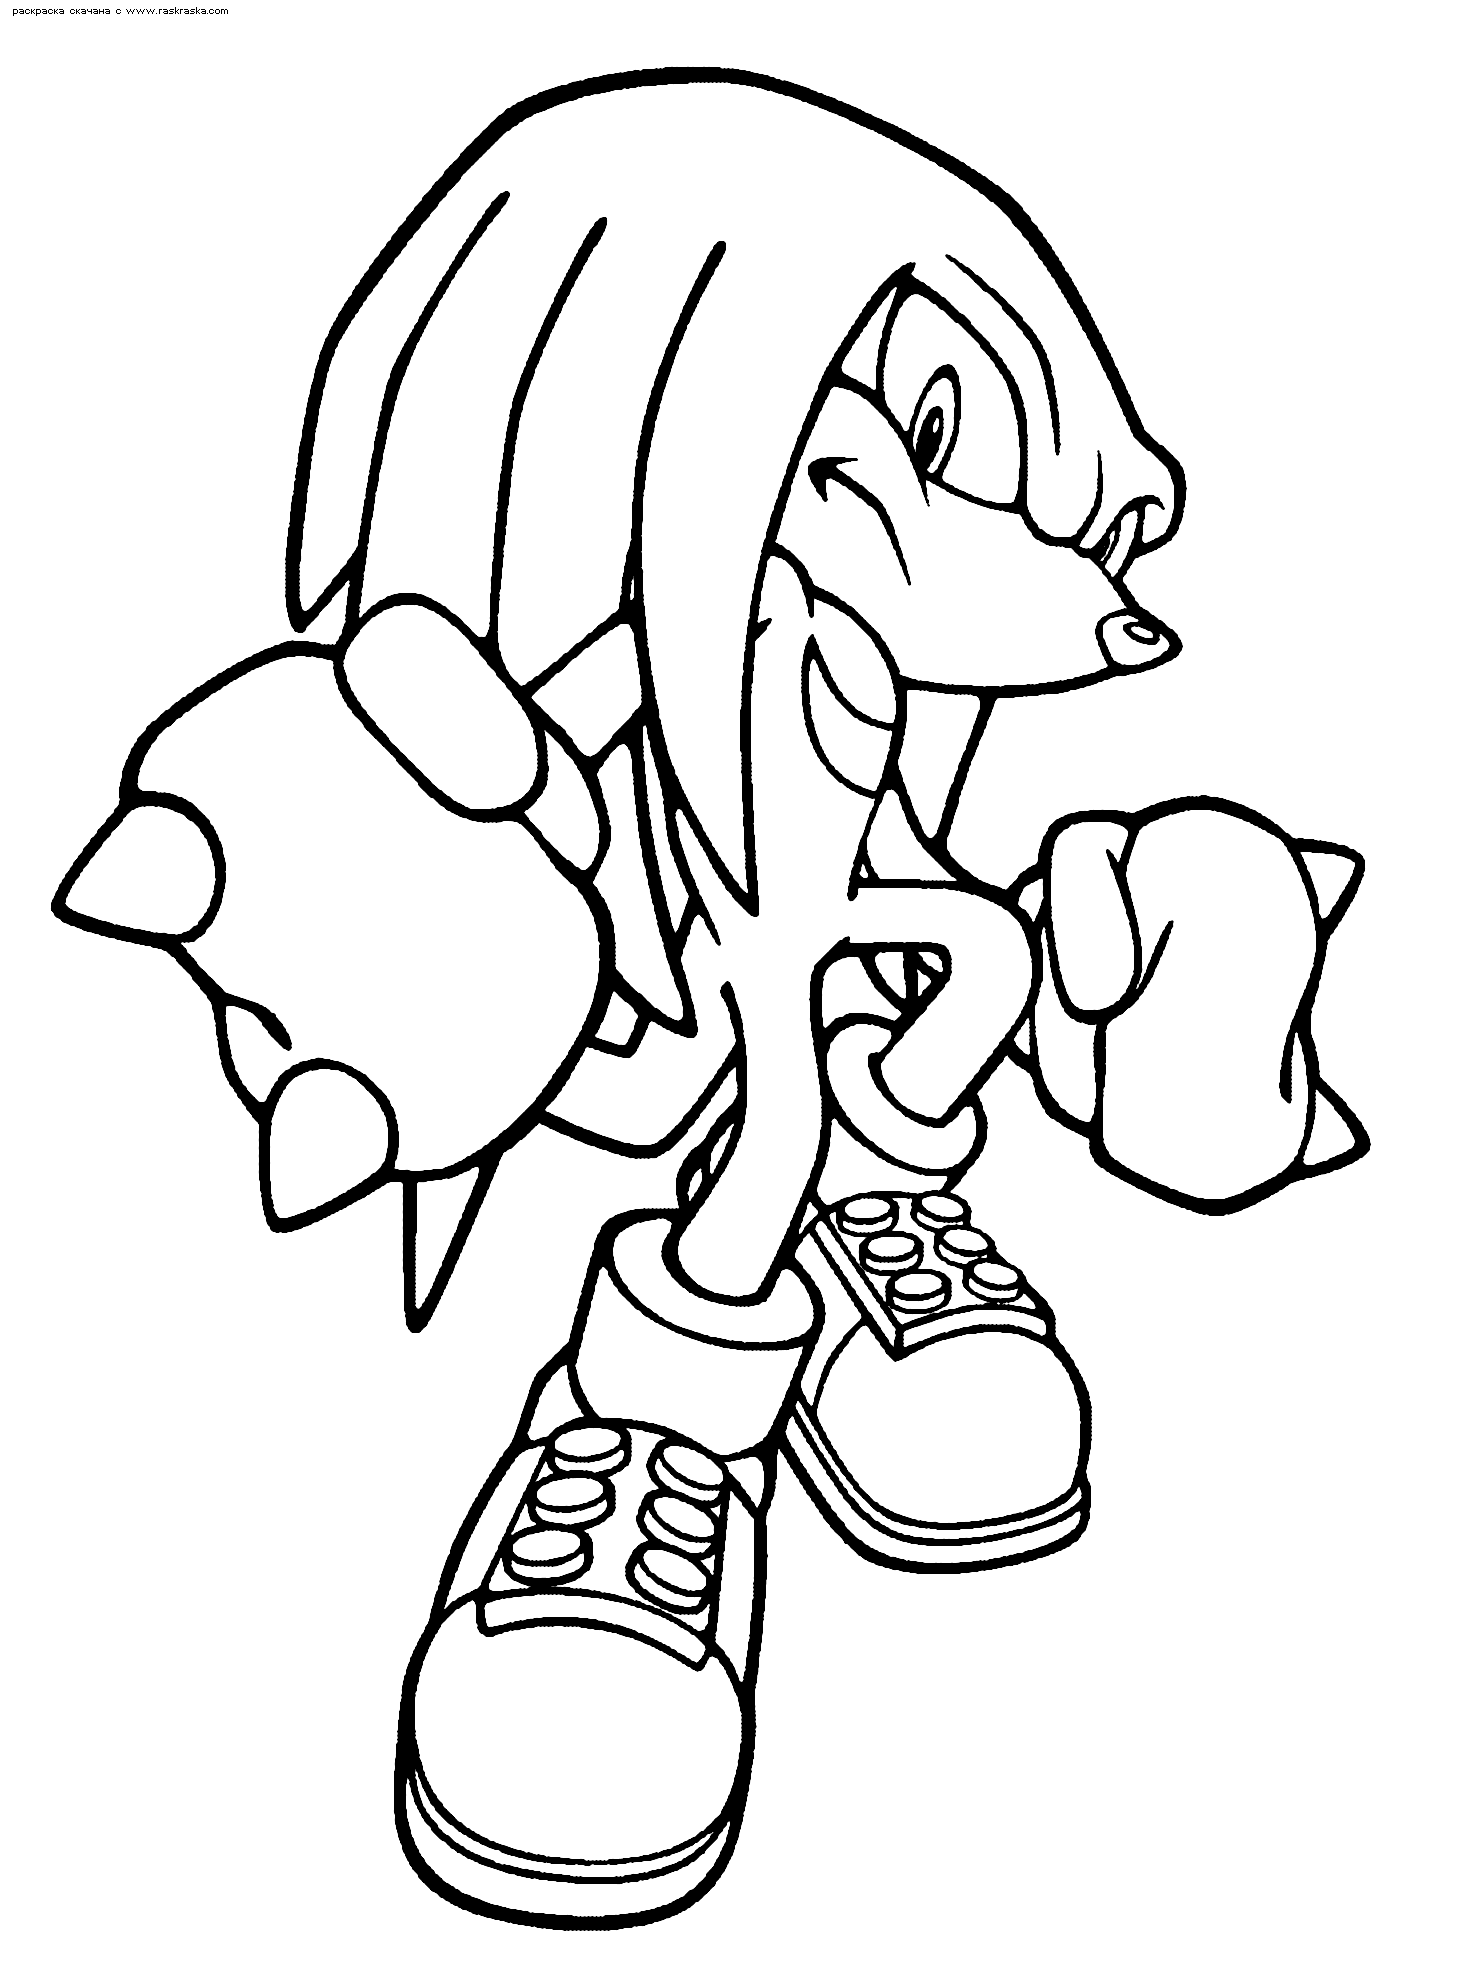 Sonic coloring pages | disney coloring pages for kids | color pages | coloring pages to print | kids coloring pages | #74